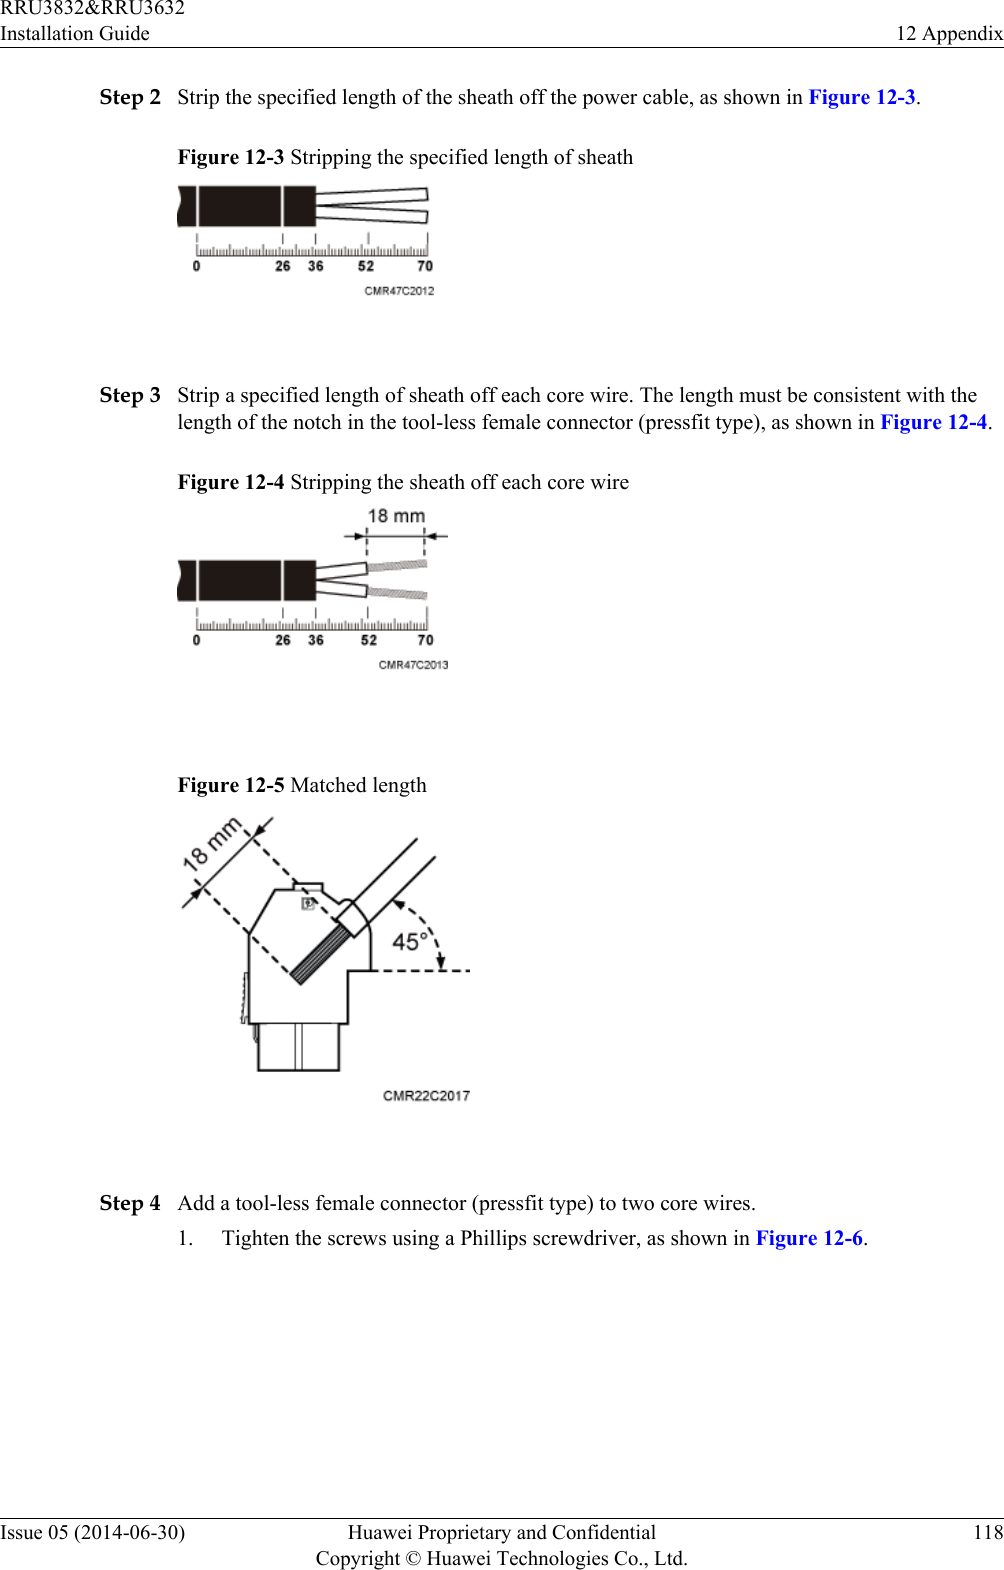 Step 2 Strip the specified length of the sheath off the power cable, as shown in Figure 12-3.Figure 12-3 Stripping the specified length of sheath Step 3 Strip a specified length of sheath off each core wire. The length must be consistent with thelength of the notch in the tool-less female connector (pressfit type), as shown in Figure 12-4.Figure 12-4 Stripping the sheath off each core wire Figure 12-5 Matched length Step 4 Add a tool-less female connector (pressfit type) to two core wires.1. Tighten the screws using a Phillips screwdriver, as shown in Figure 12-6.RRU3832&amp;RRU3632Installation Guide 12 AppendixIssue 05 (2014-06-30) Huawei Proprietary and ConfidentialCopyright © Huawei Technologies Co., Ltd.118